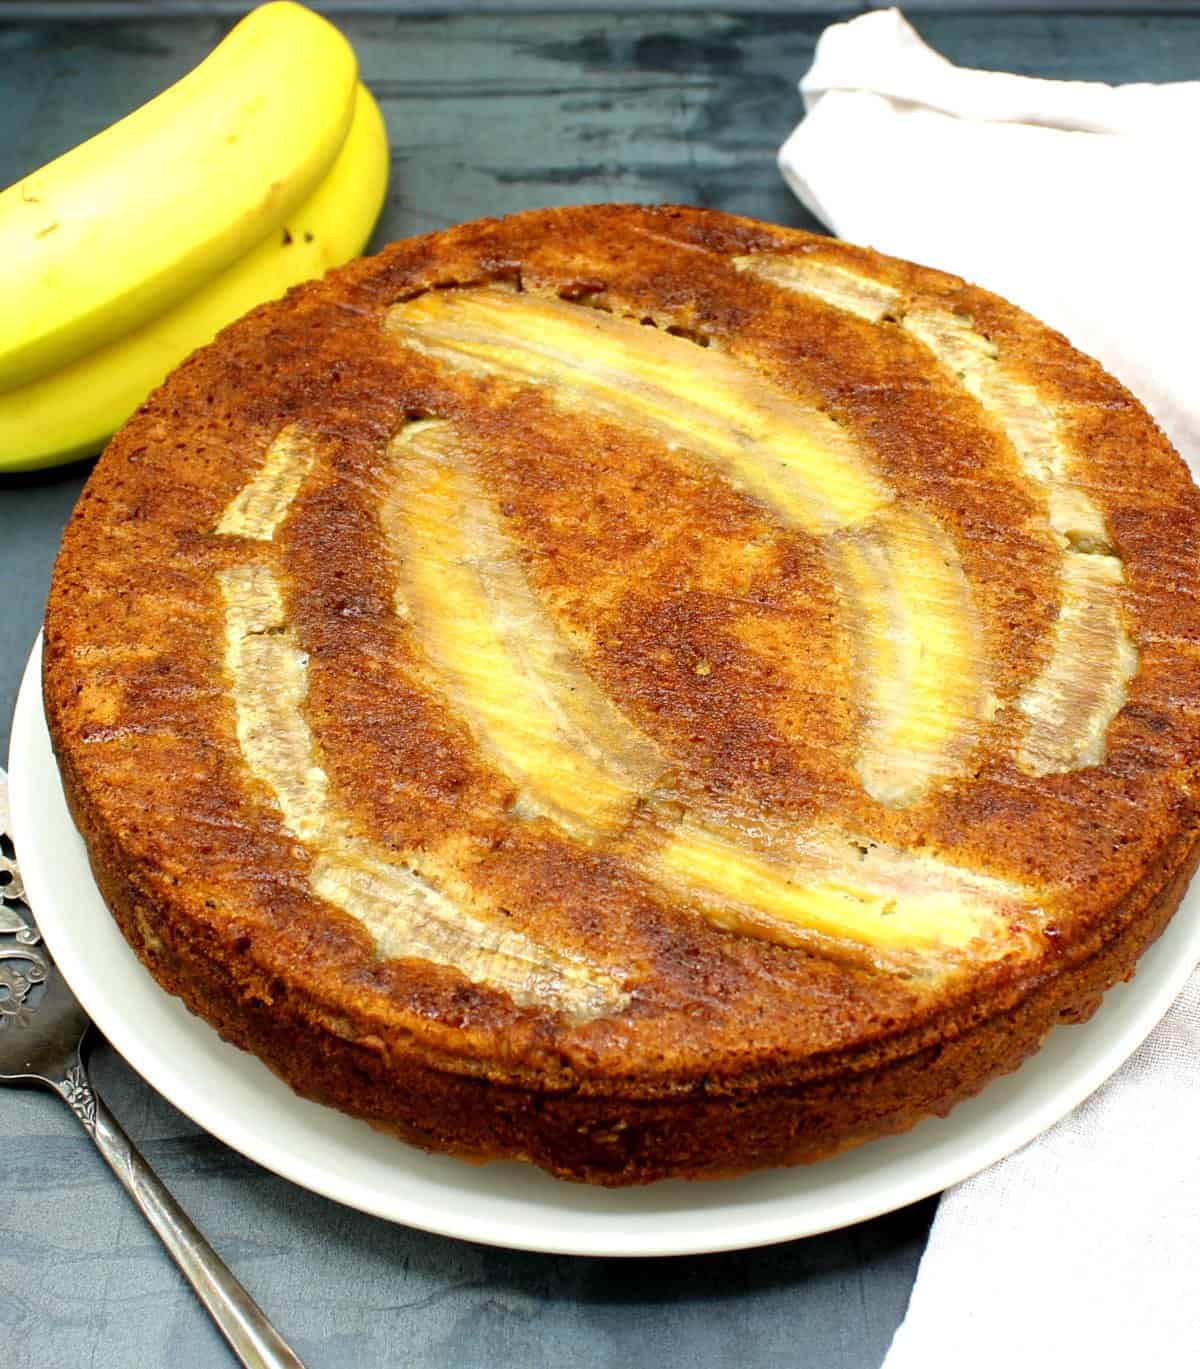 Vegan banana cake on white plate with bananas and cake server in background.